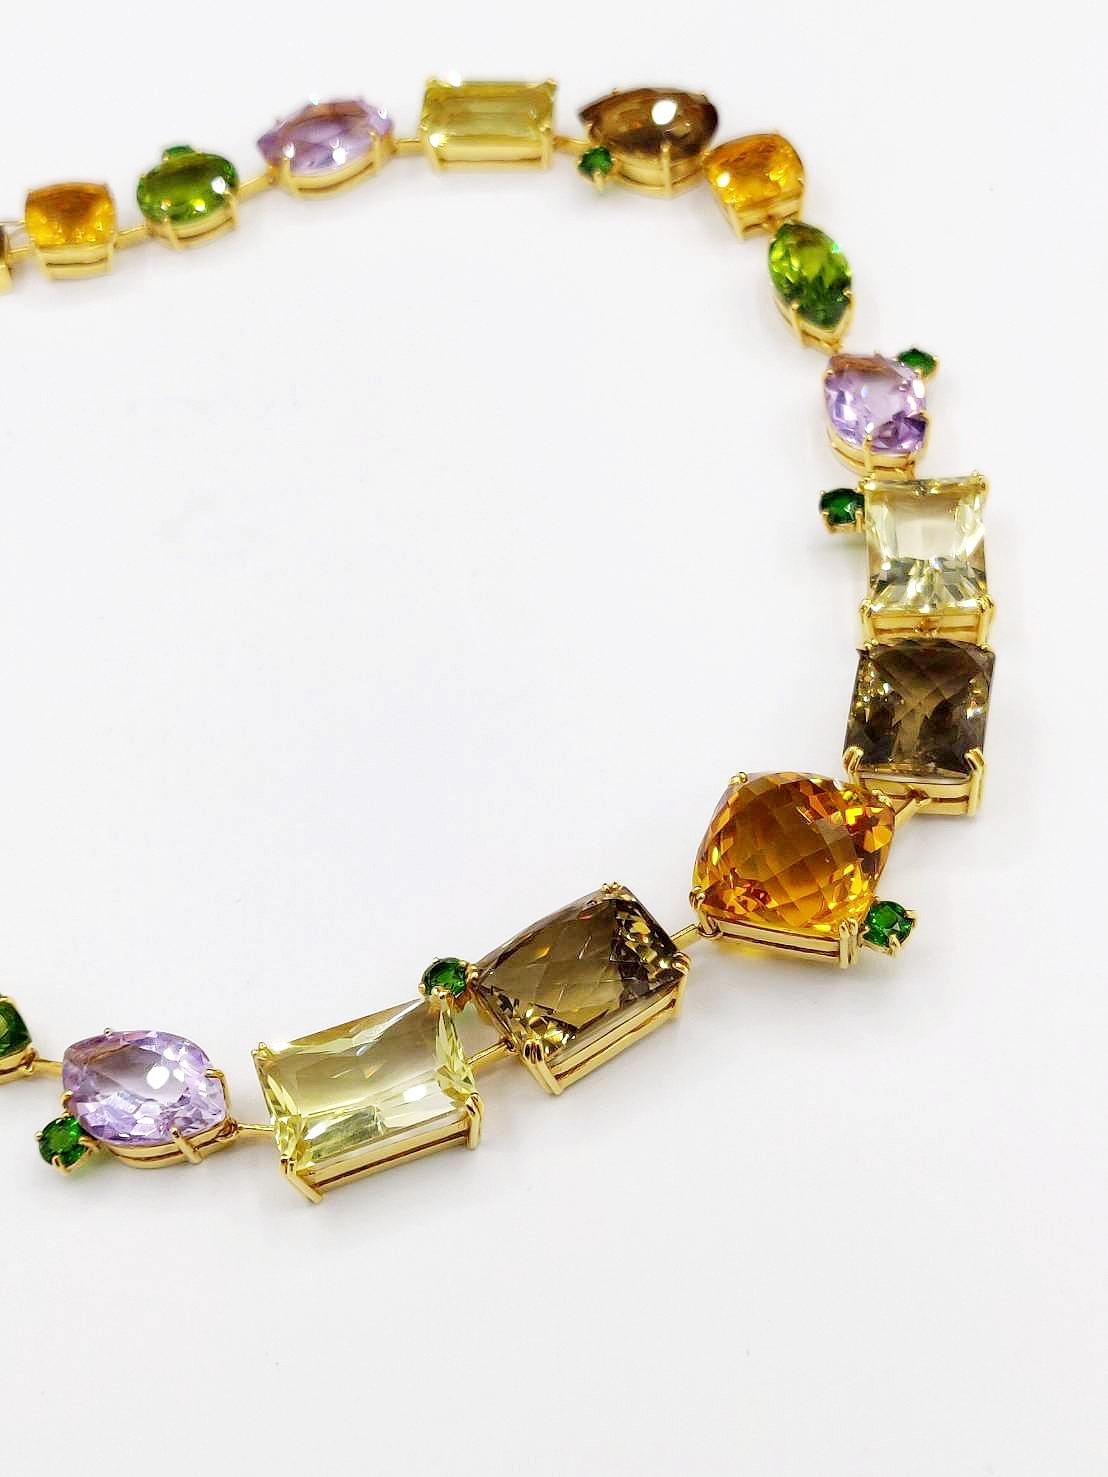 Colourful semi-precious stone tennis necklace with a dash of vivid green tsavorite in 18K yellow gold with a champagne diamond clasp

Metal: 18K Yellow Gold
Champagne Diamond: round brilliant, 0.42 carat
Tsavorite: round, 3.81 carat
Citrine,